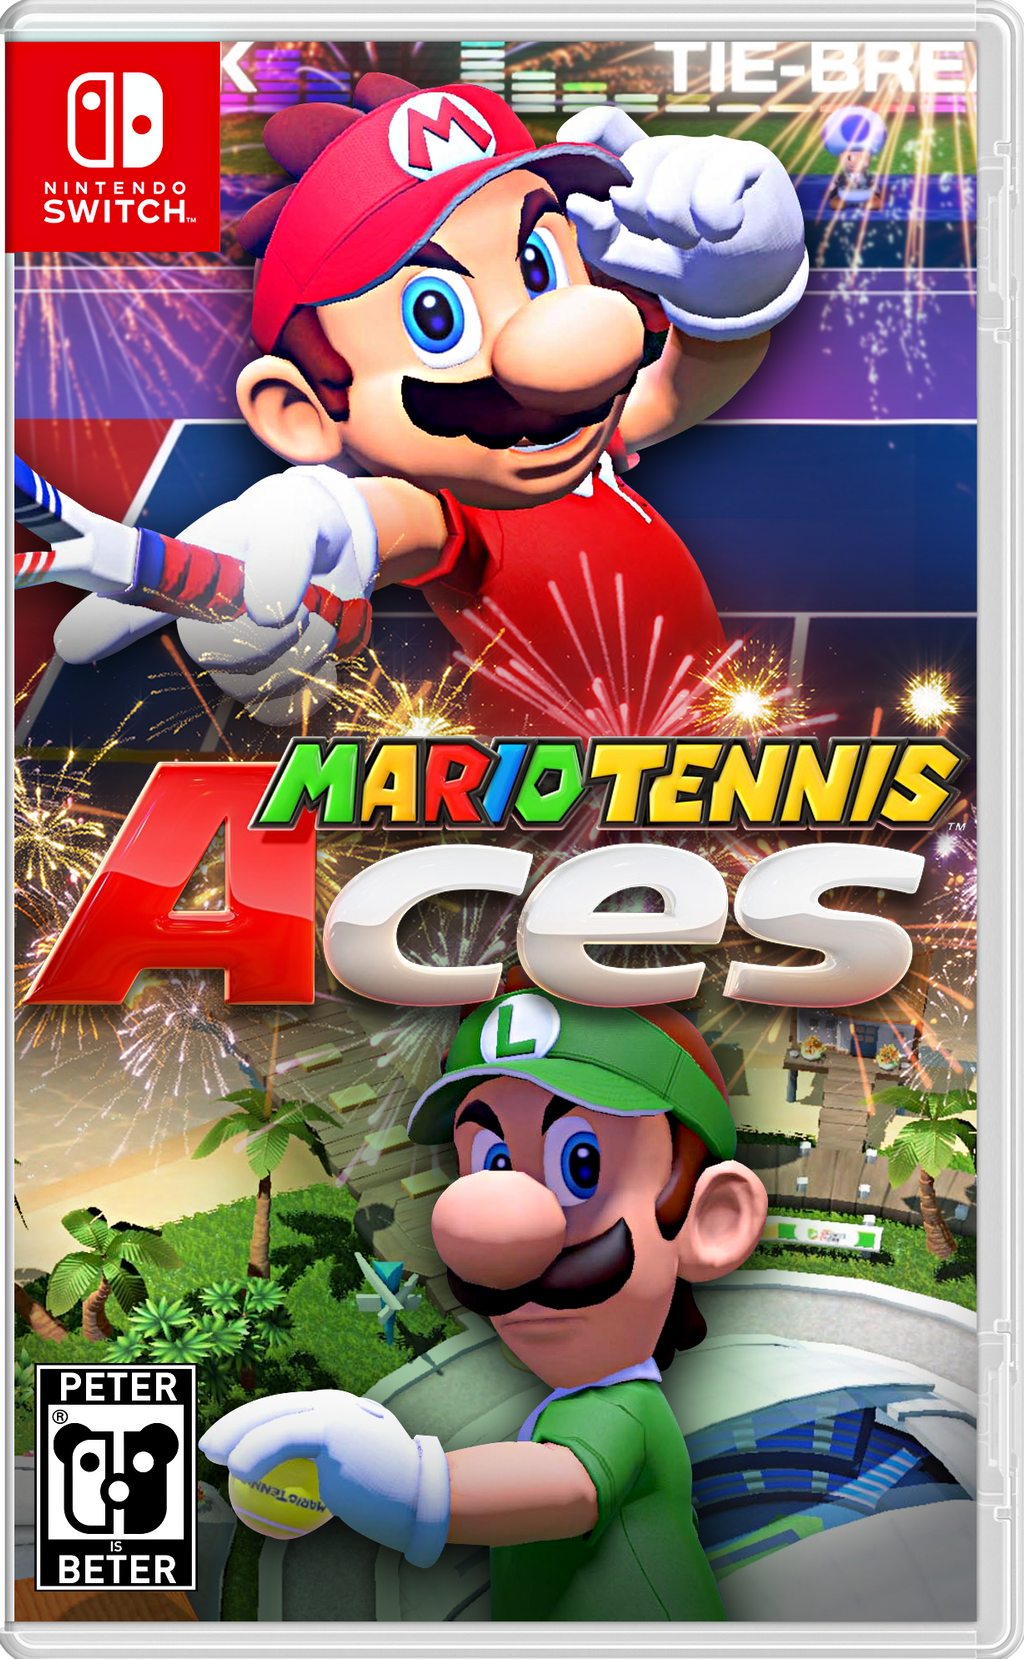 DeviantArt Tennis Cover PeterisBeter Nintendo by Mario on Aces Switch